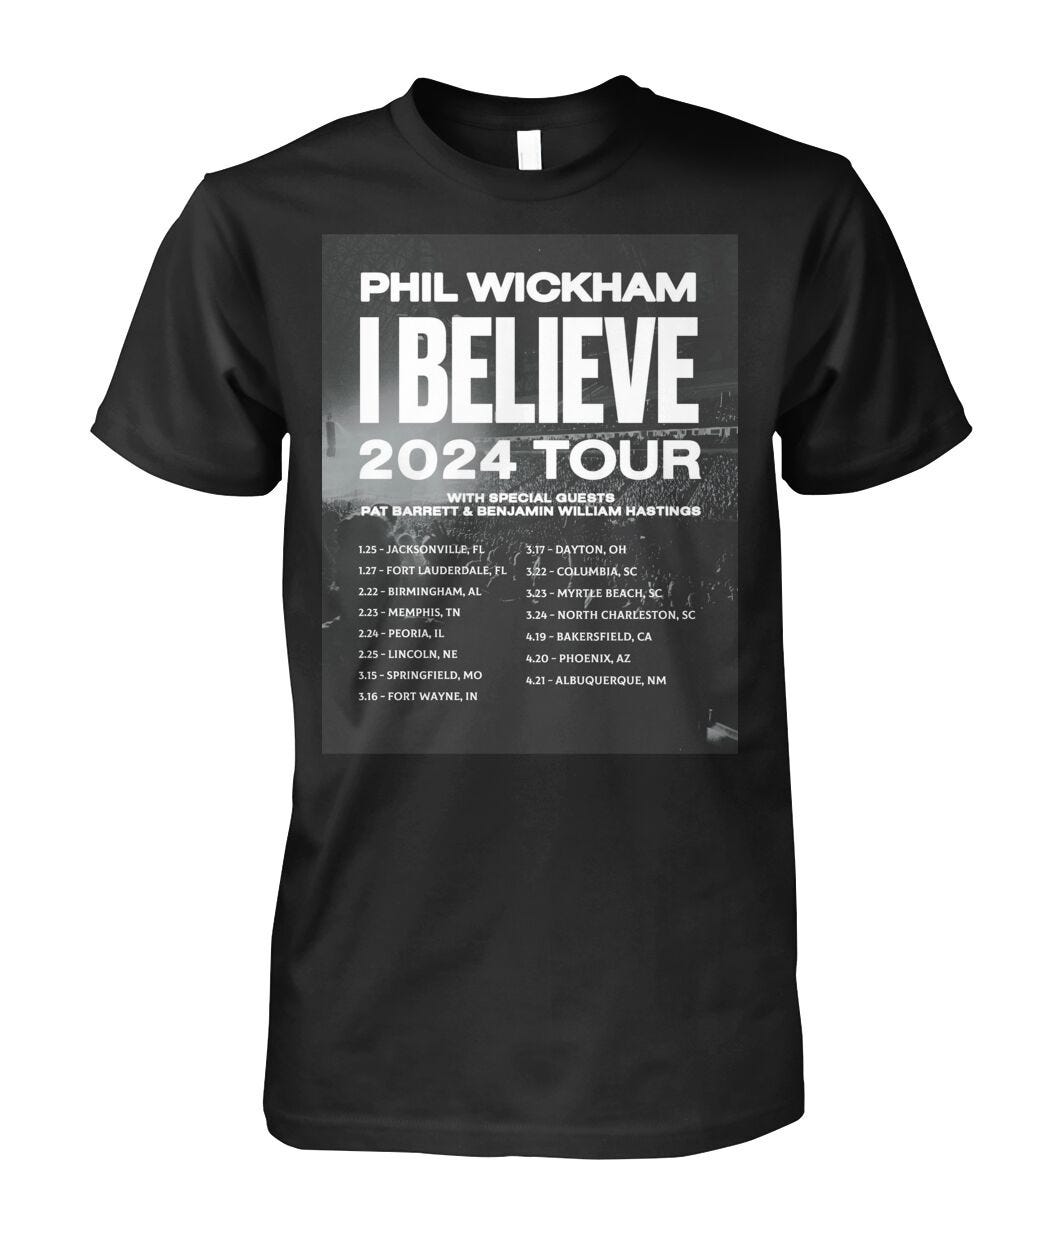 Phil Wickham Tour Dates 2024 Experience the Musical Journey